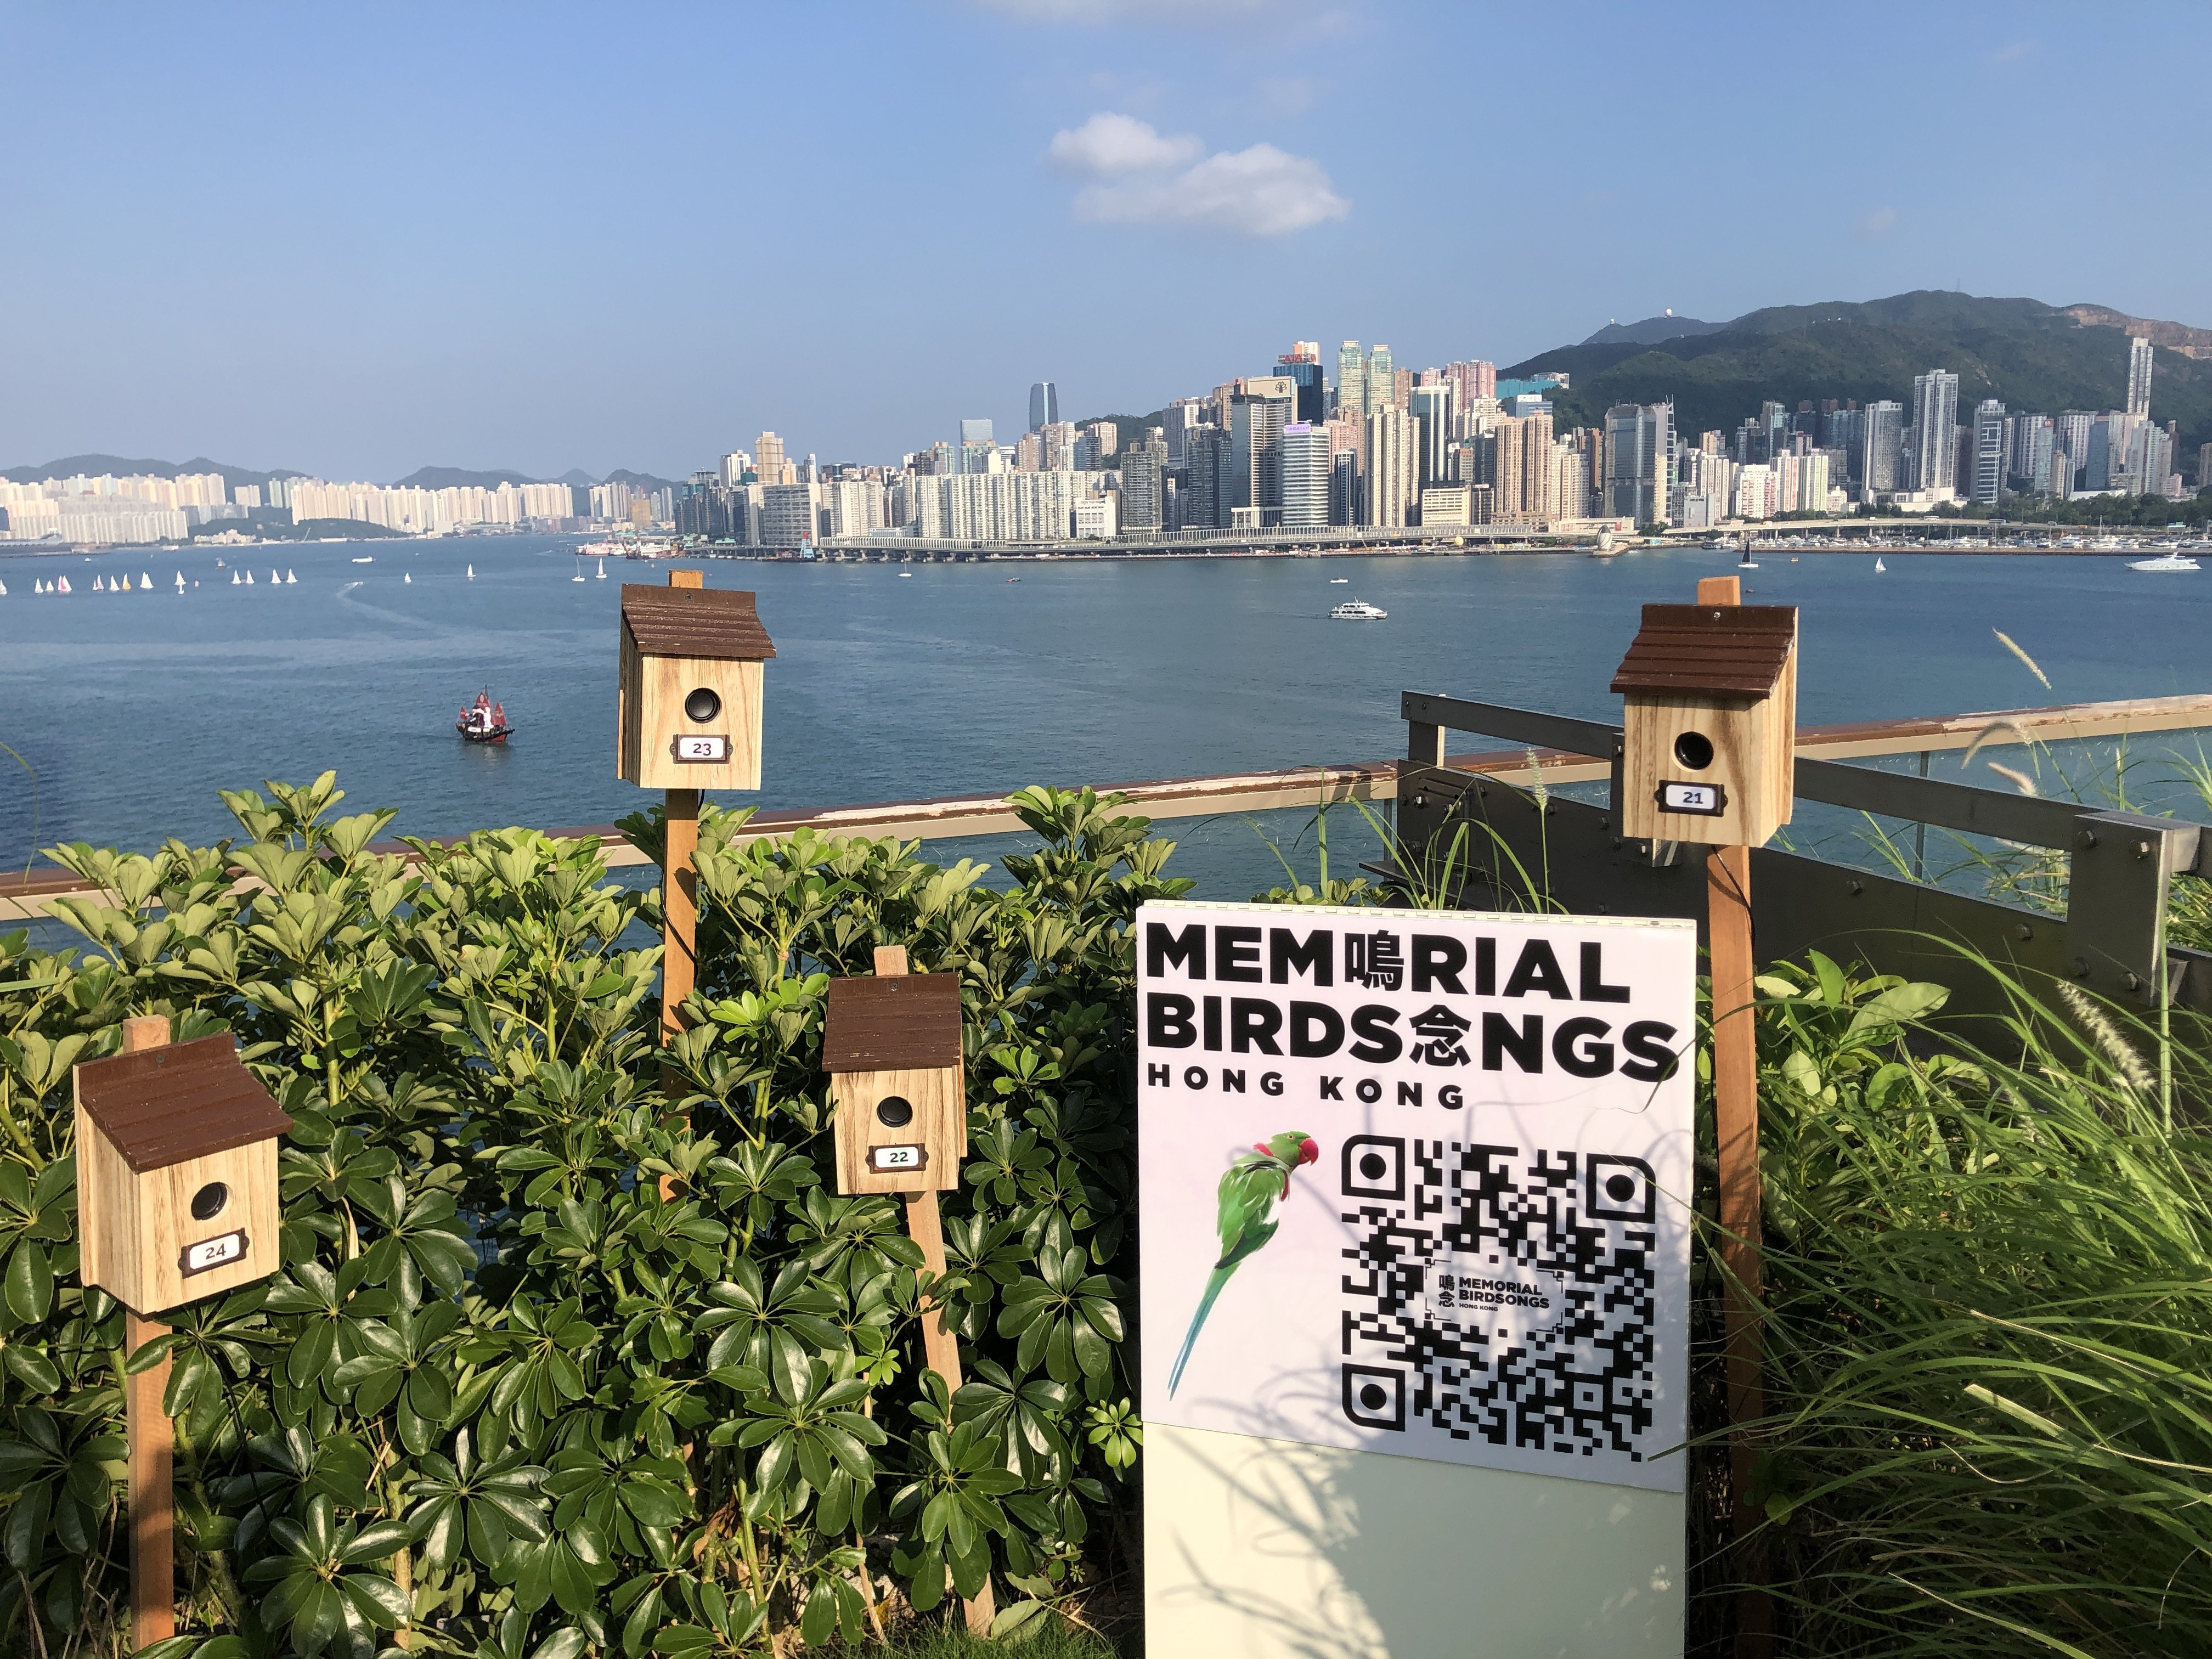 In Hong Kong art project “Memorial Birdsongs”, visitors remember a loved one by choosing birdsong to play though a speaker in a bird box at the Nature Discovery Park in Tsim Sha Tsui. They receive a digital memento of the song and a painting of the bird. Photo: Enid Tsui